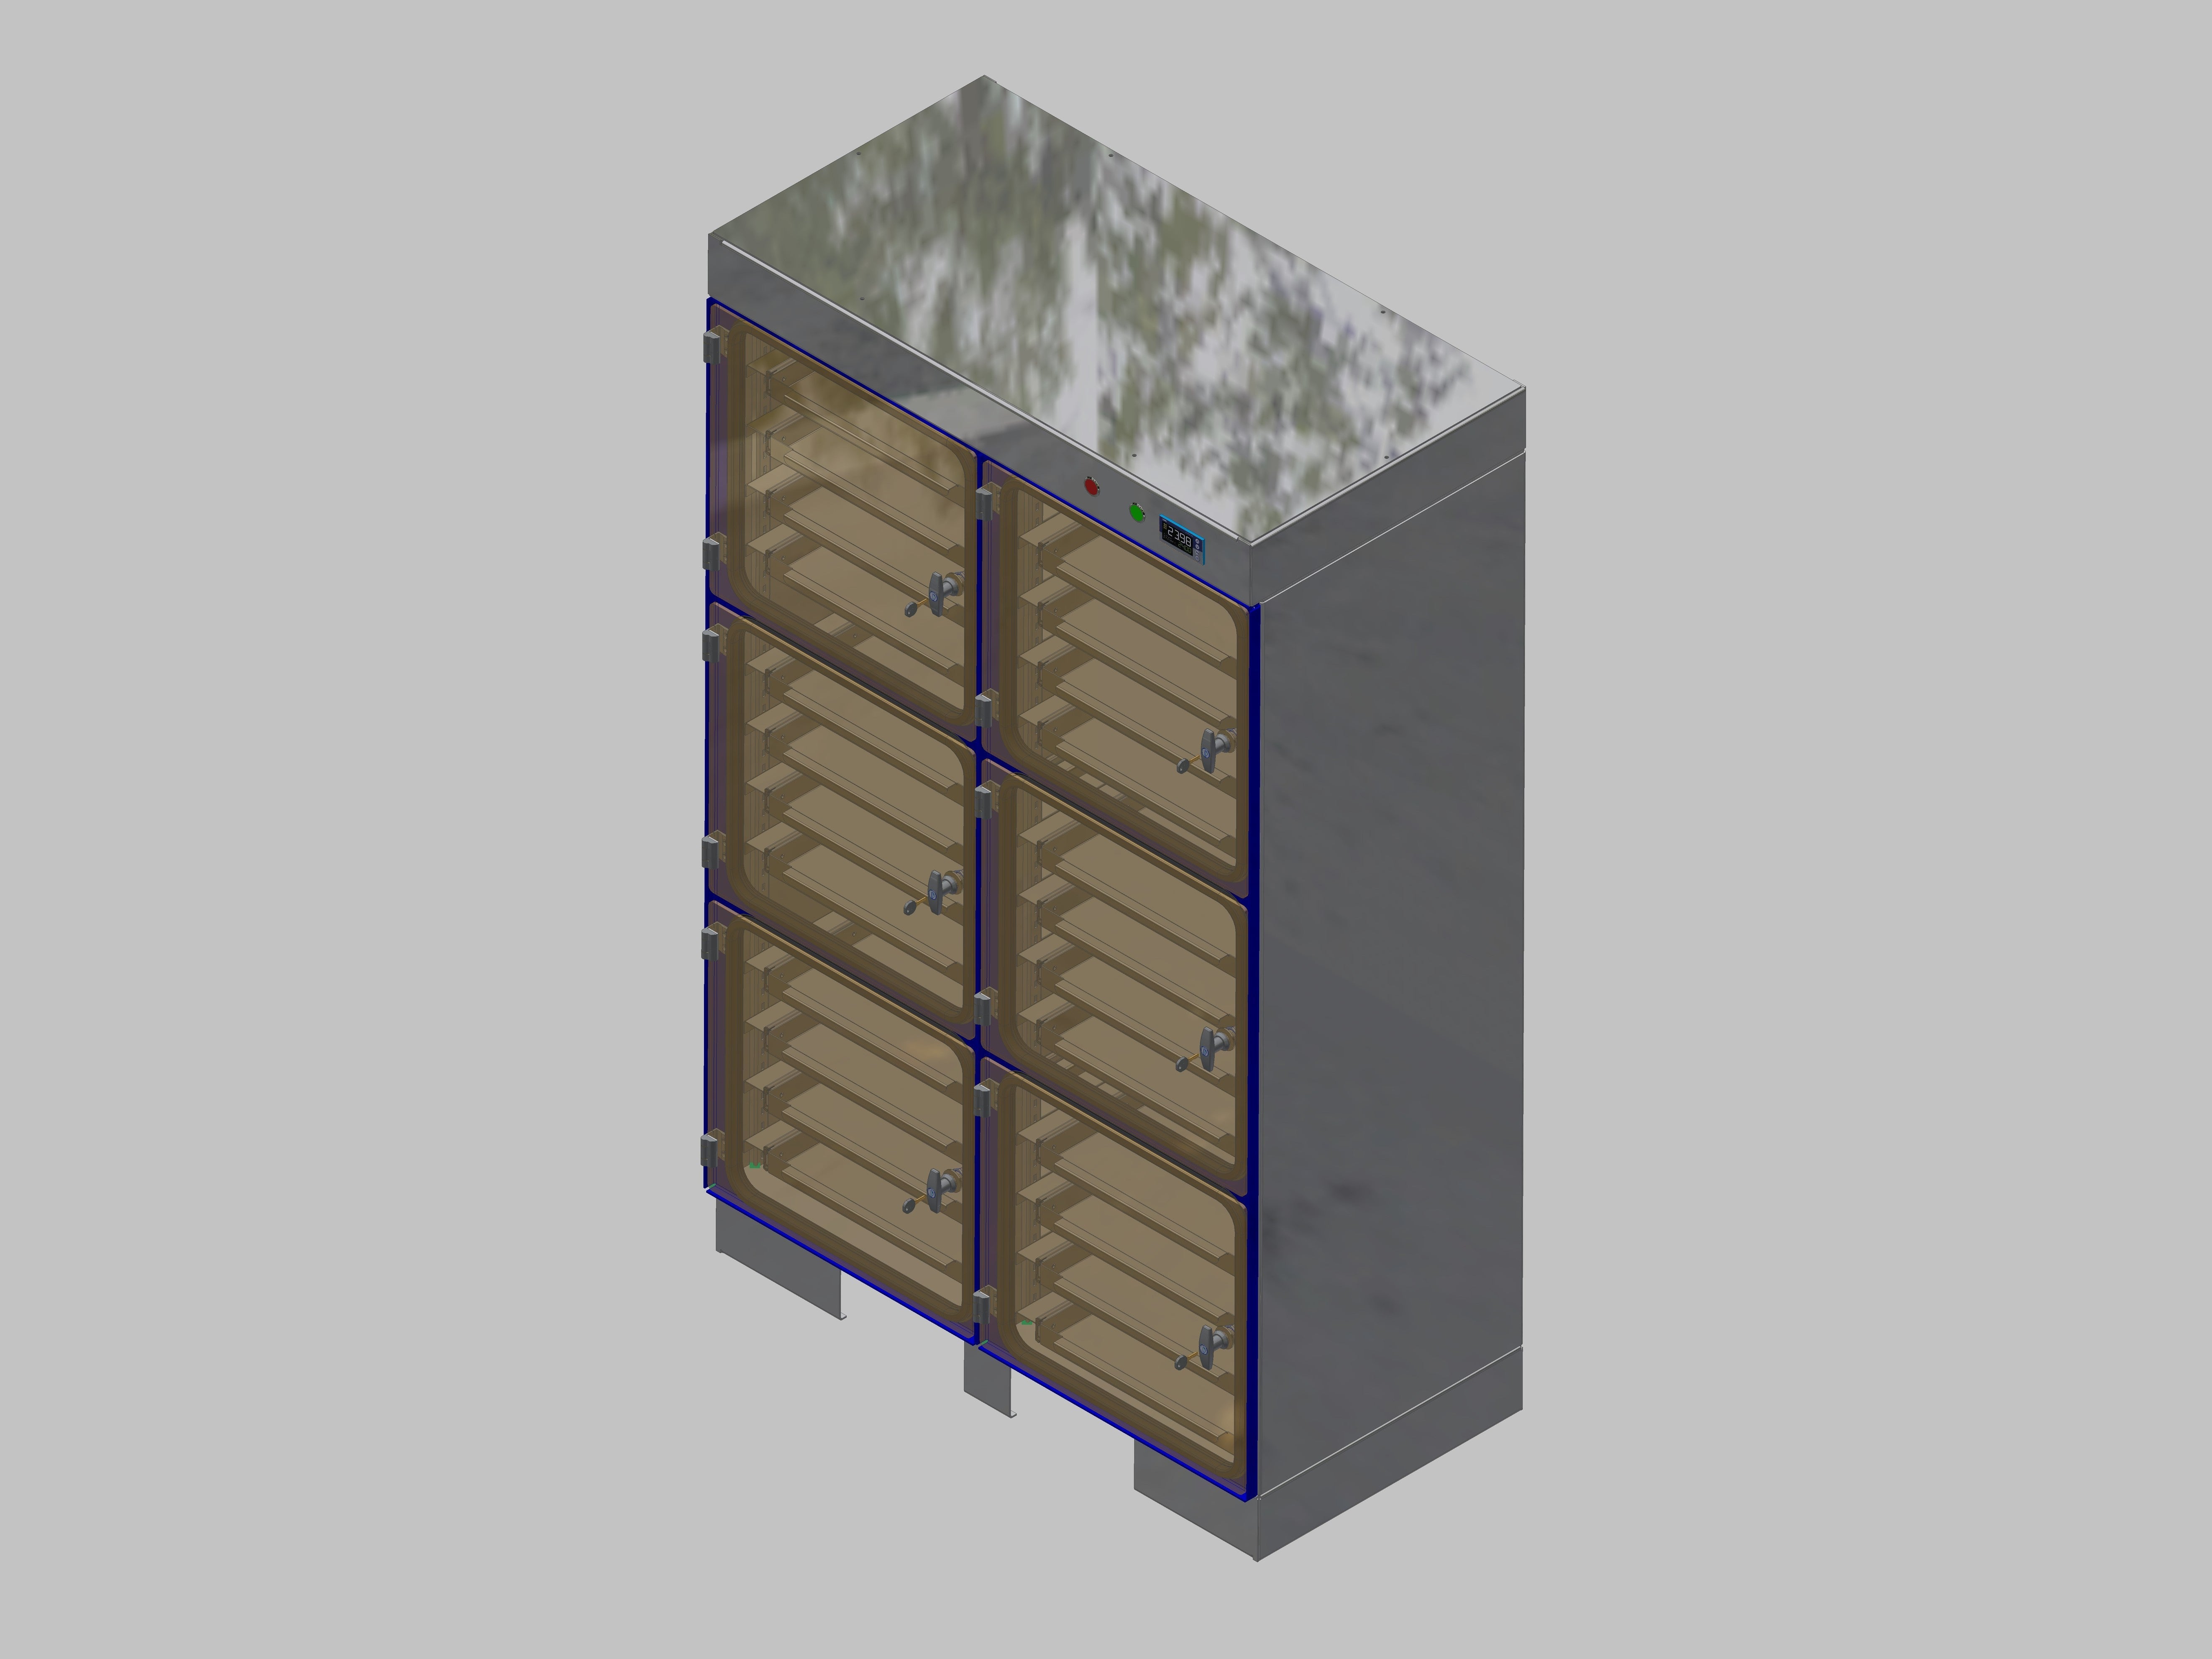 Dry storage cabinet-ITN-1200-6 with 4 drawers per compartment and base design that can be accessed with adjustable feet